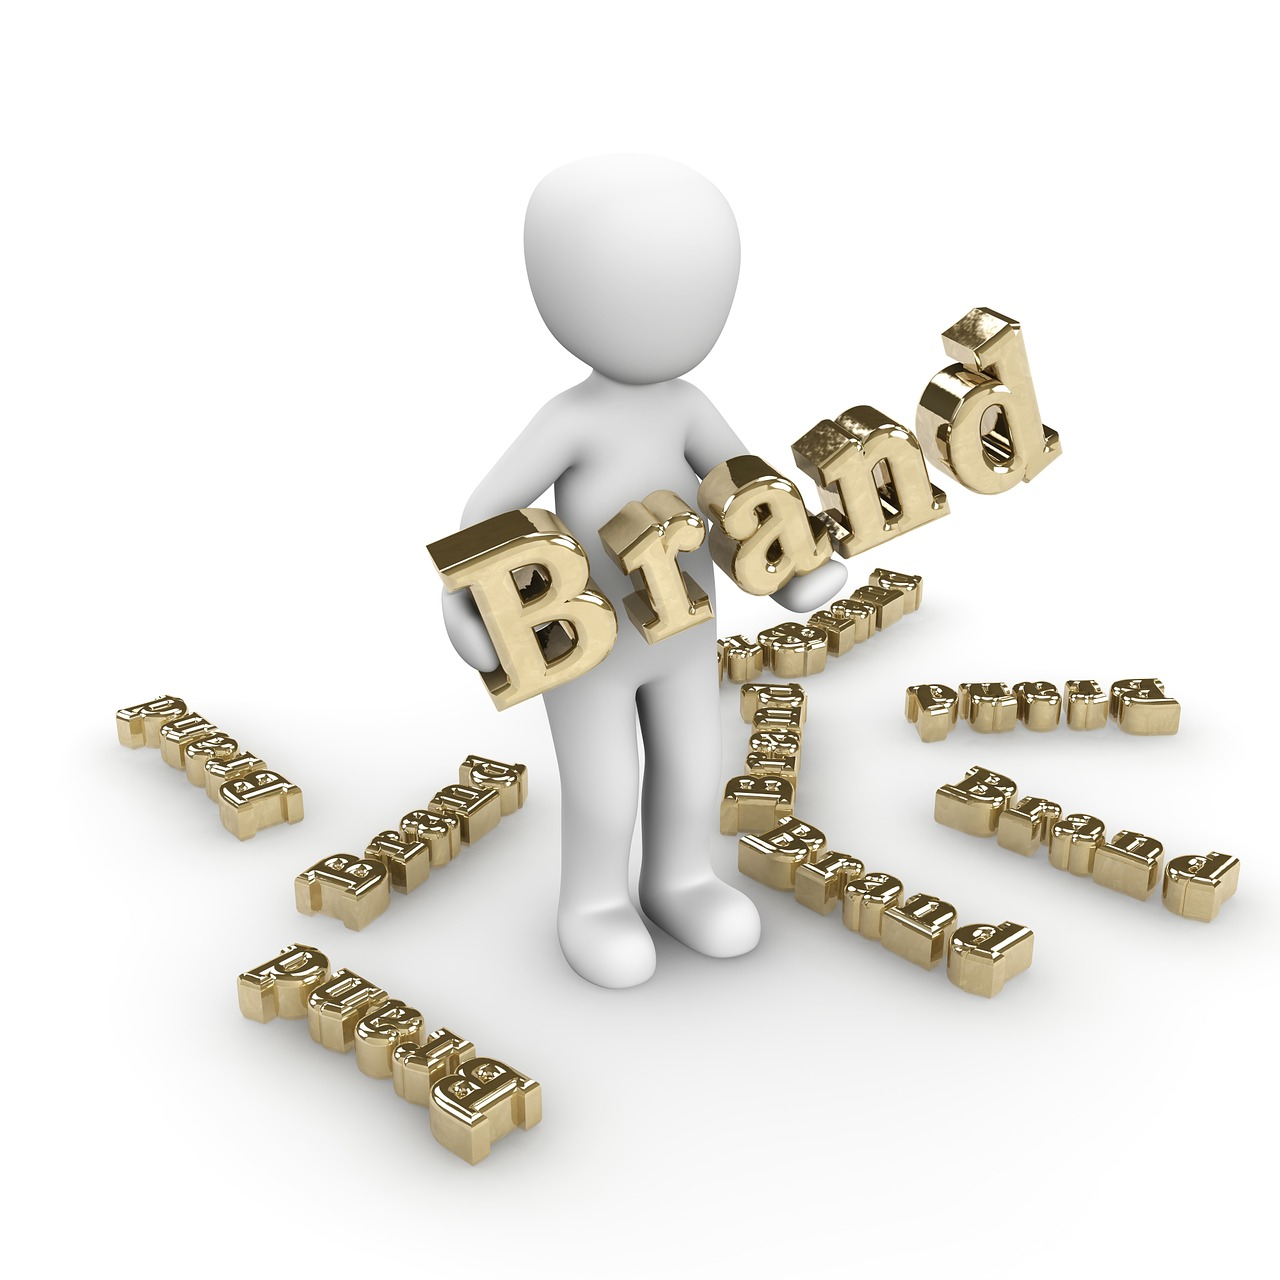 A healthy brand turns customers into advocates